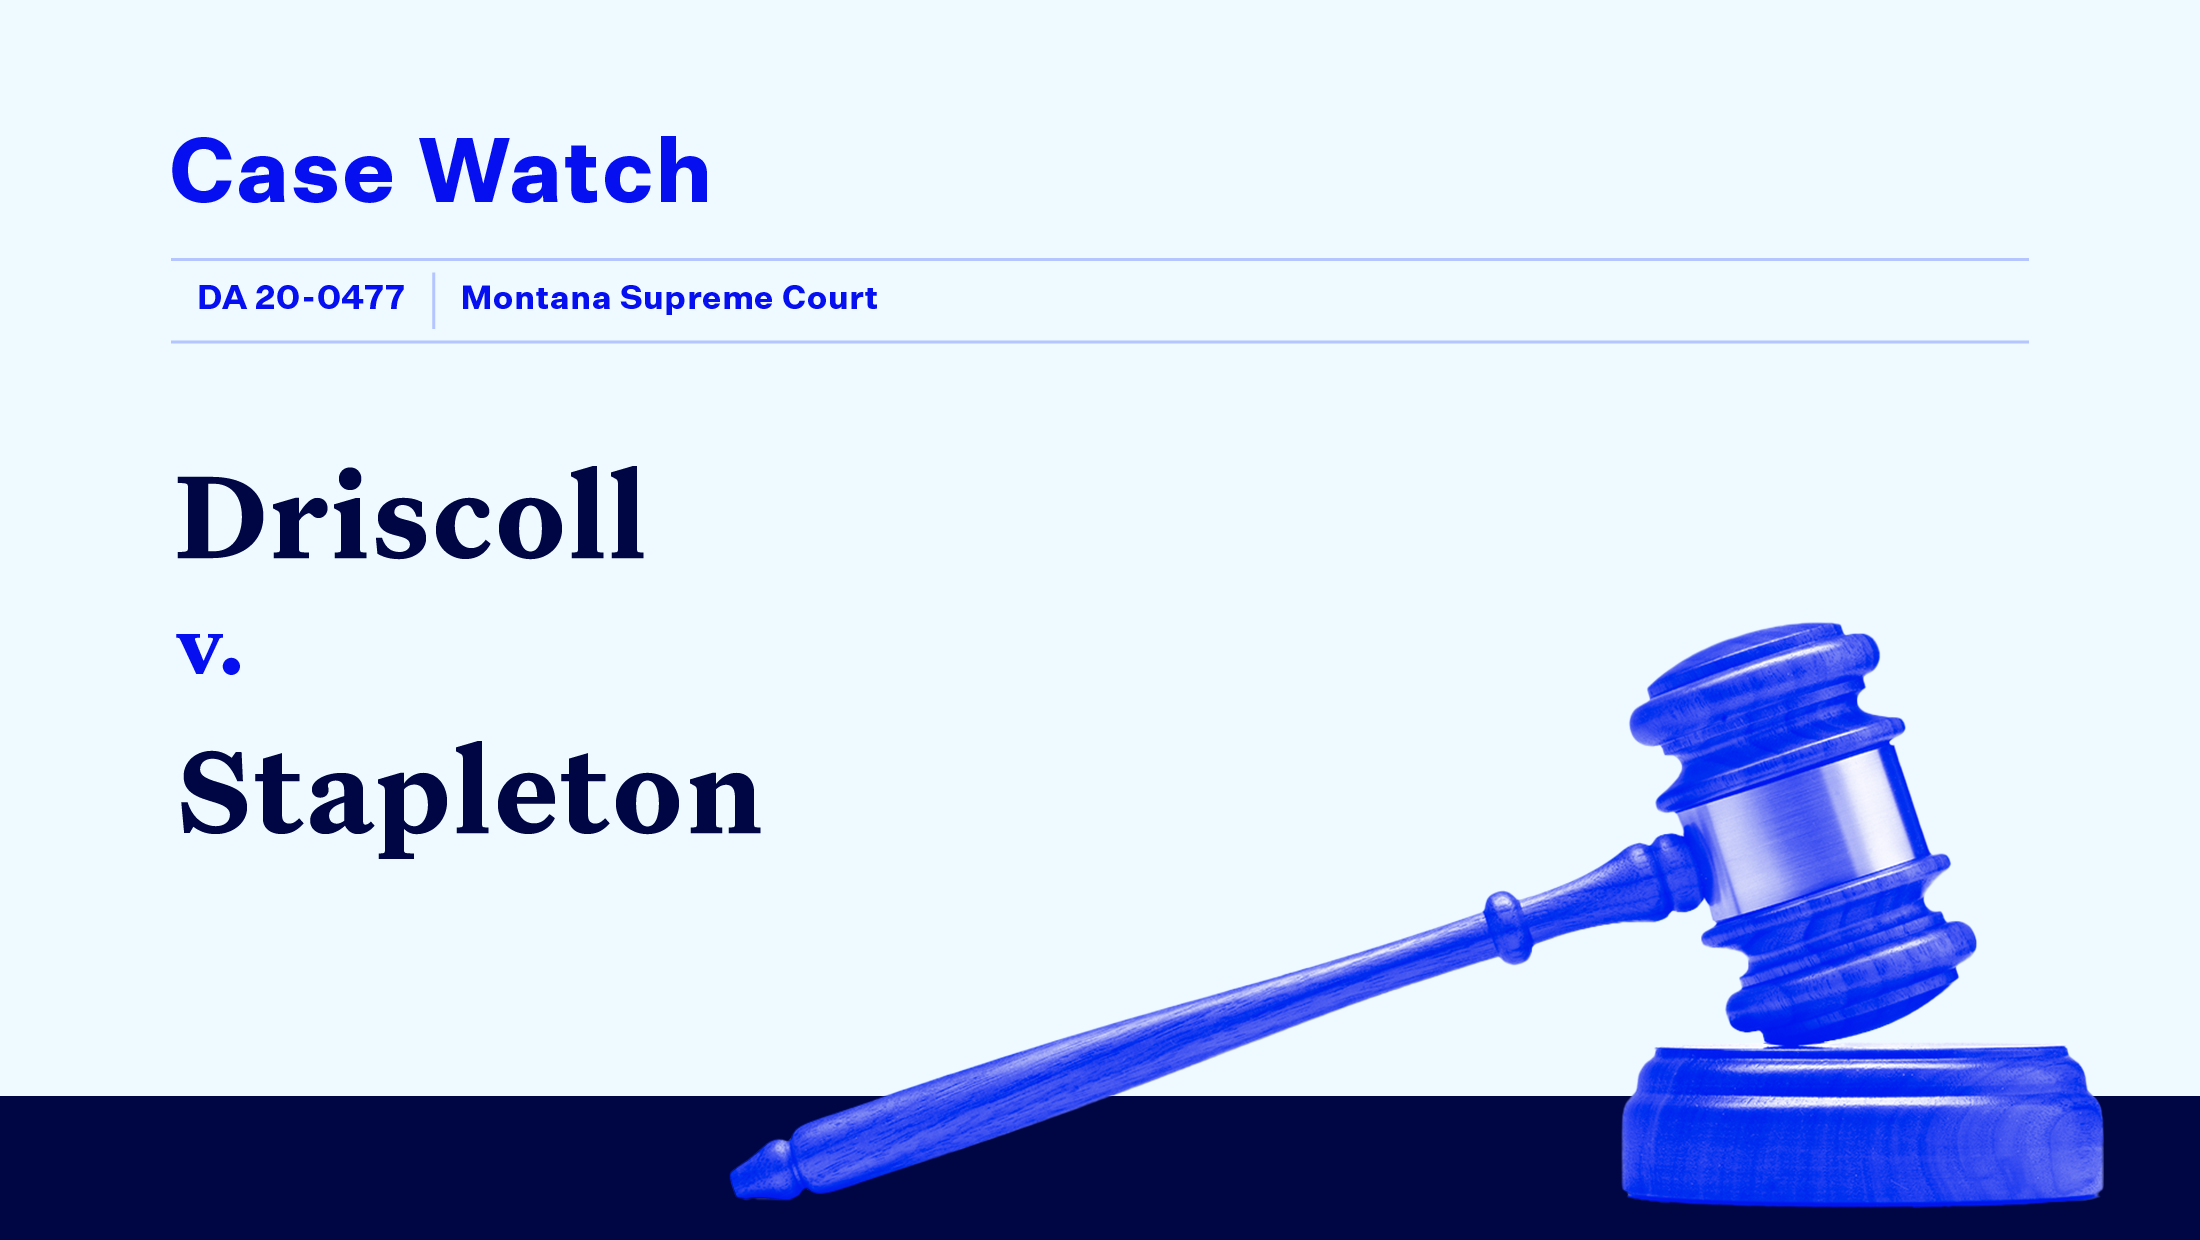 "CASE WATCH Driscoll v. Stapleton" and other case-specific text, including the file number and court name, with a blue-tinted gavel